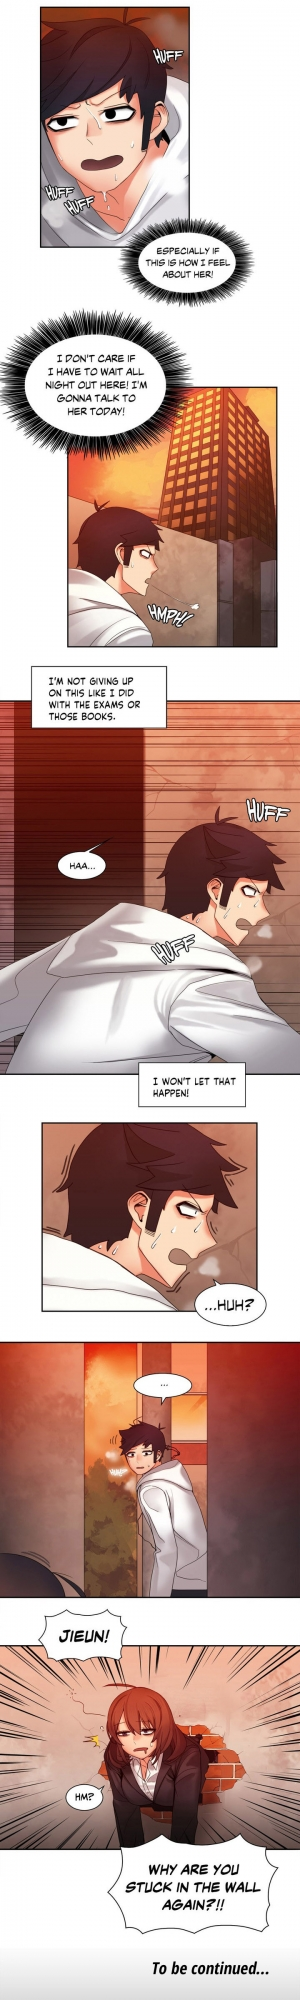 [Gaehoju, Gunnermul] The Girl That Got Stuck in the Wall Ch.11/11 [COMPLETED] [English] [Hentai Universe] - Page 103